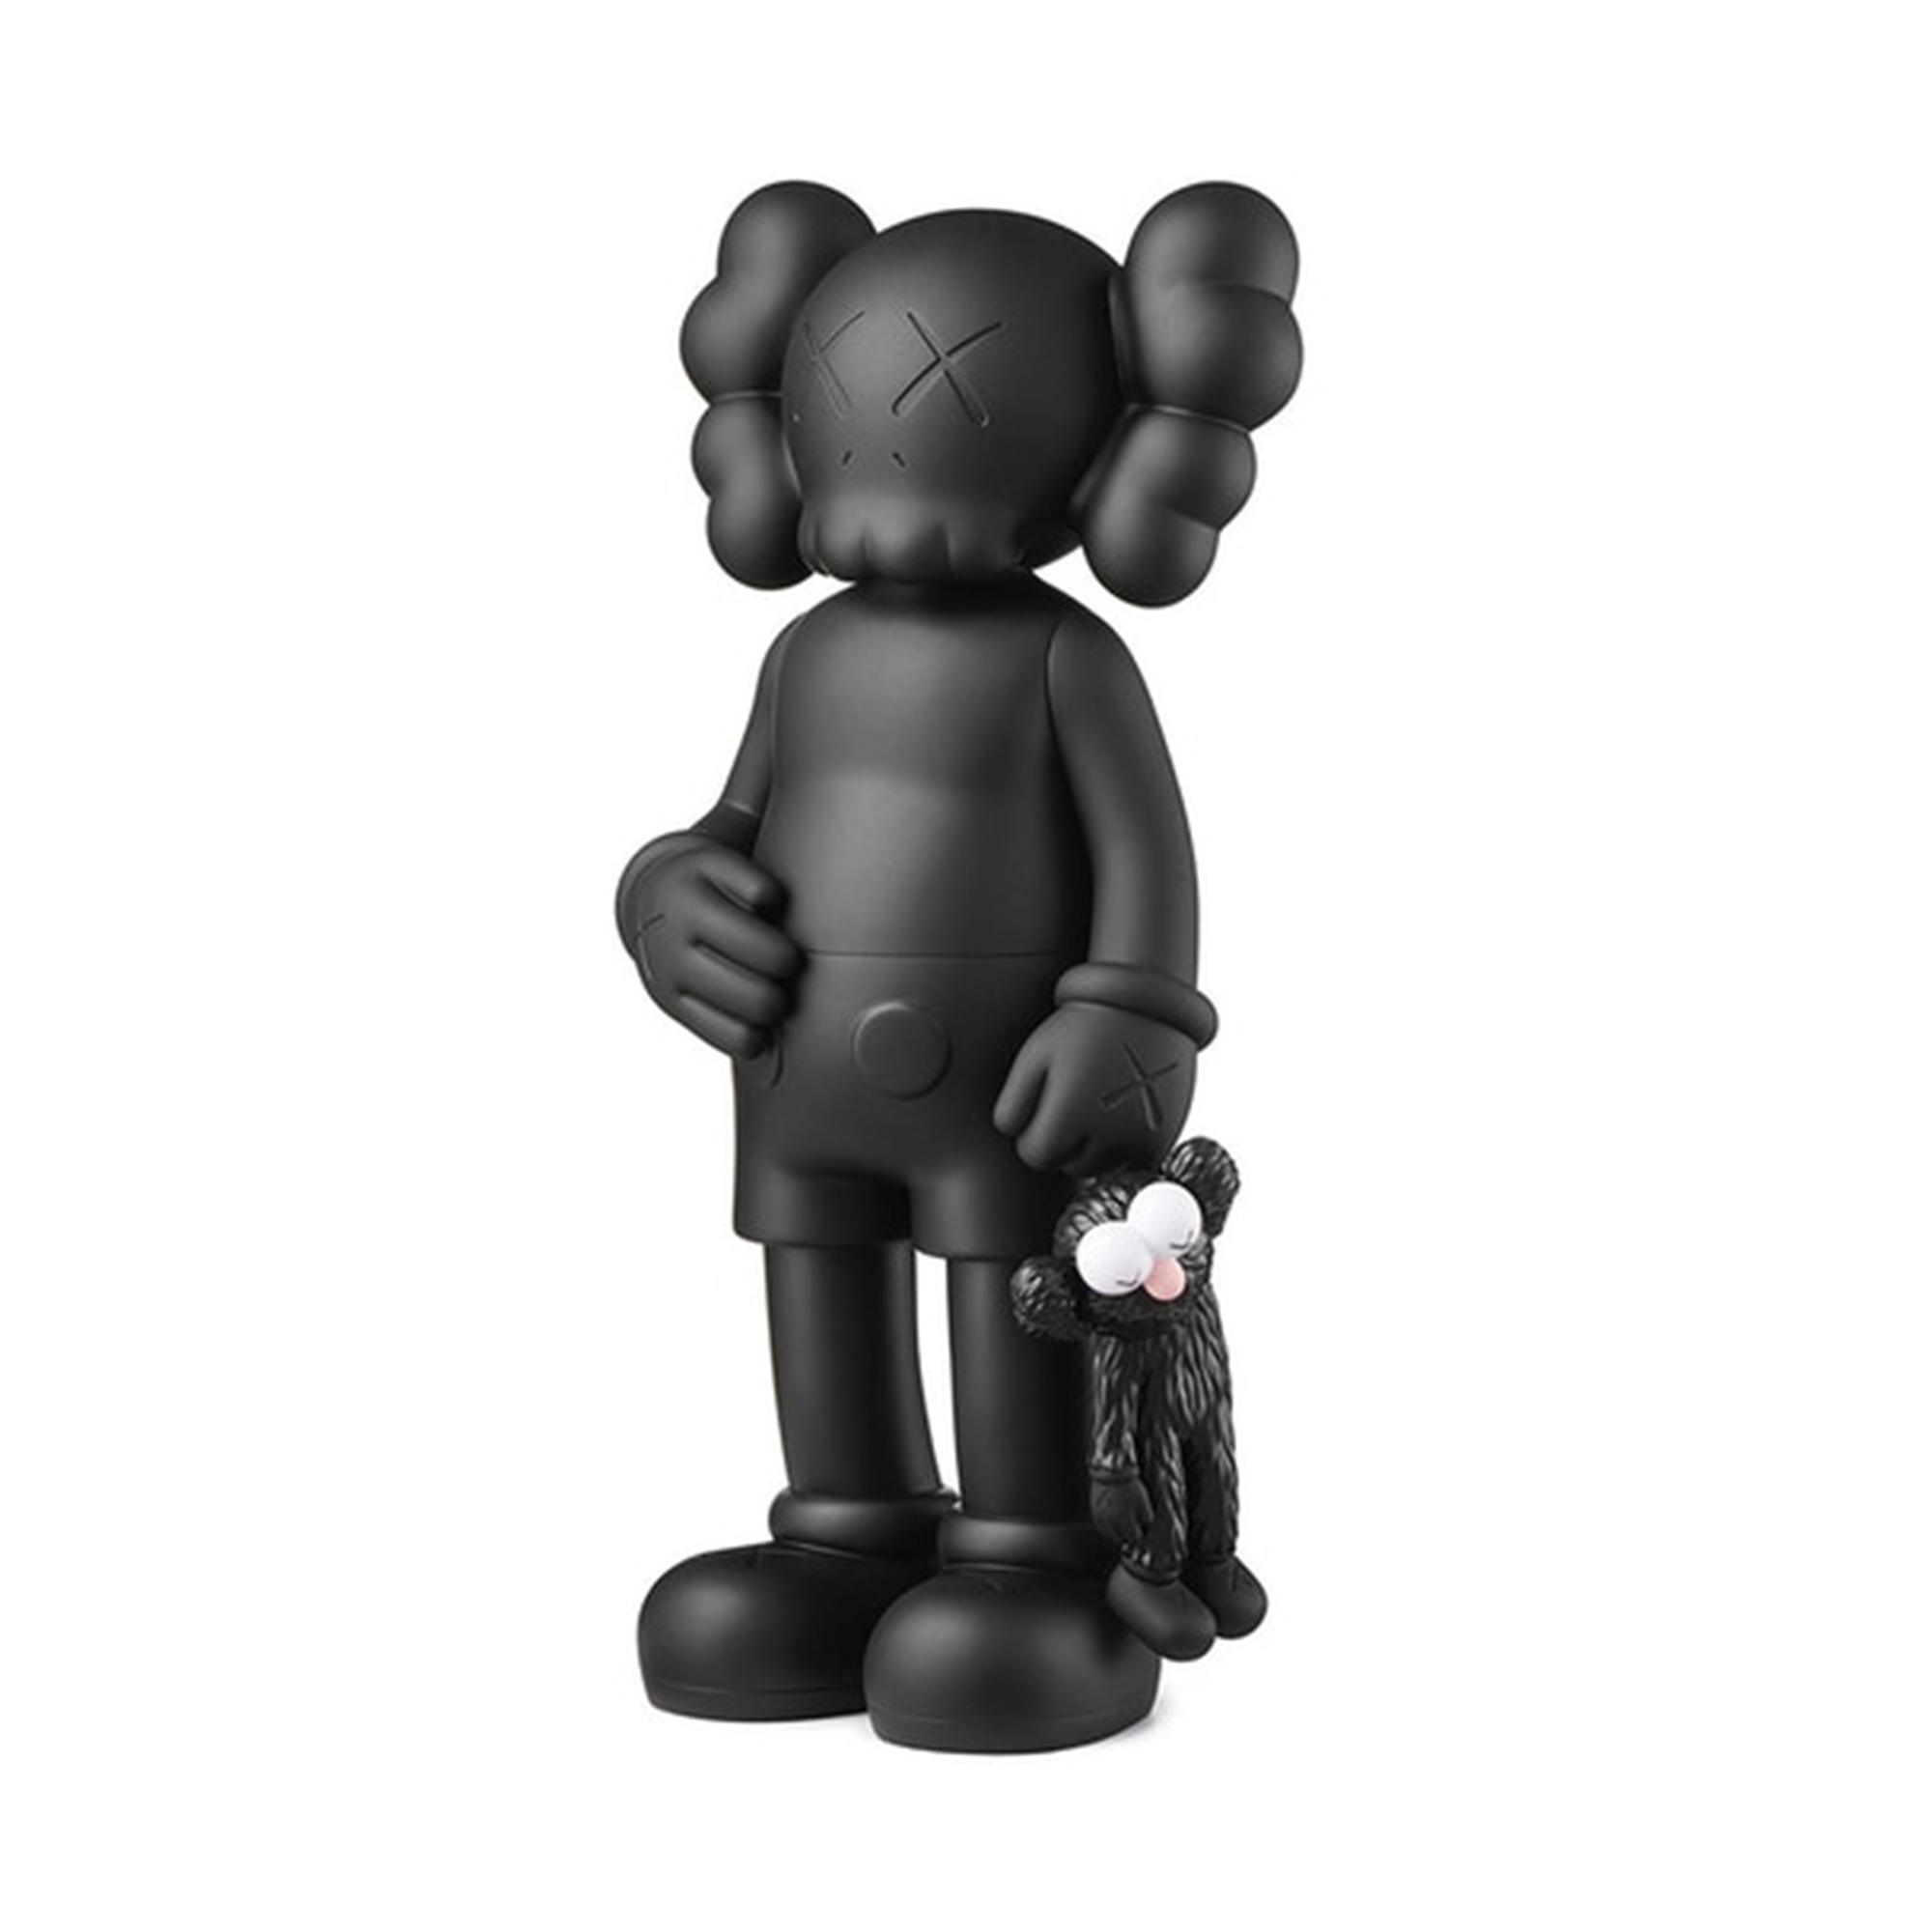 Kaws SHARE Black Open Edition by Medicom Toy